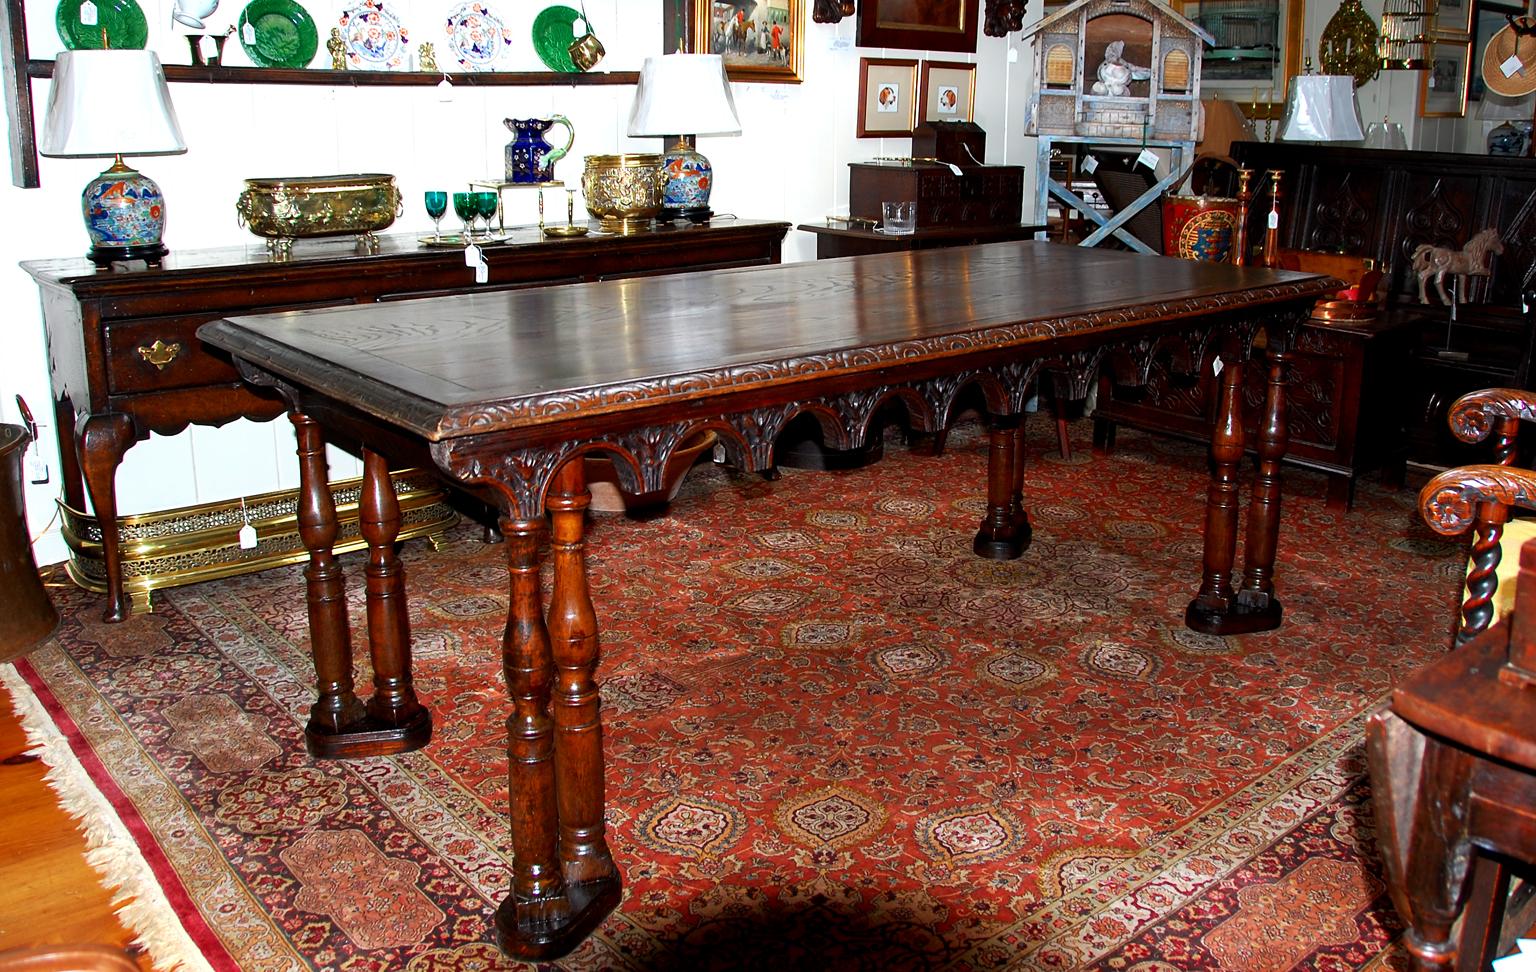 French oak seven foot long dining table constructed from 17th century altar rail and balusters. We had this 17th century altar rail for many years and expected to use it on our balcony, but never got around to doing that. It was such a wonderful